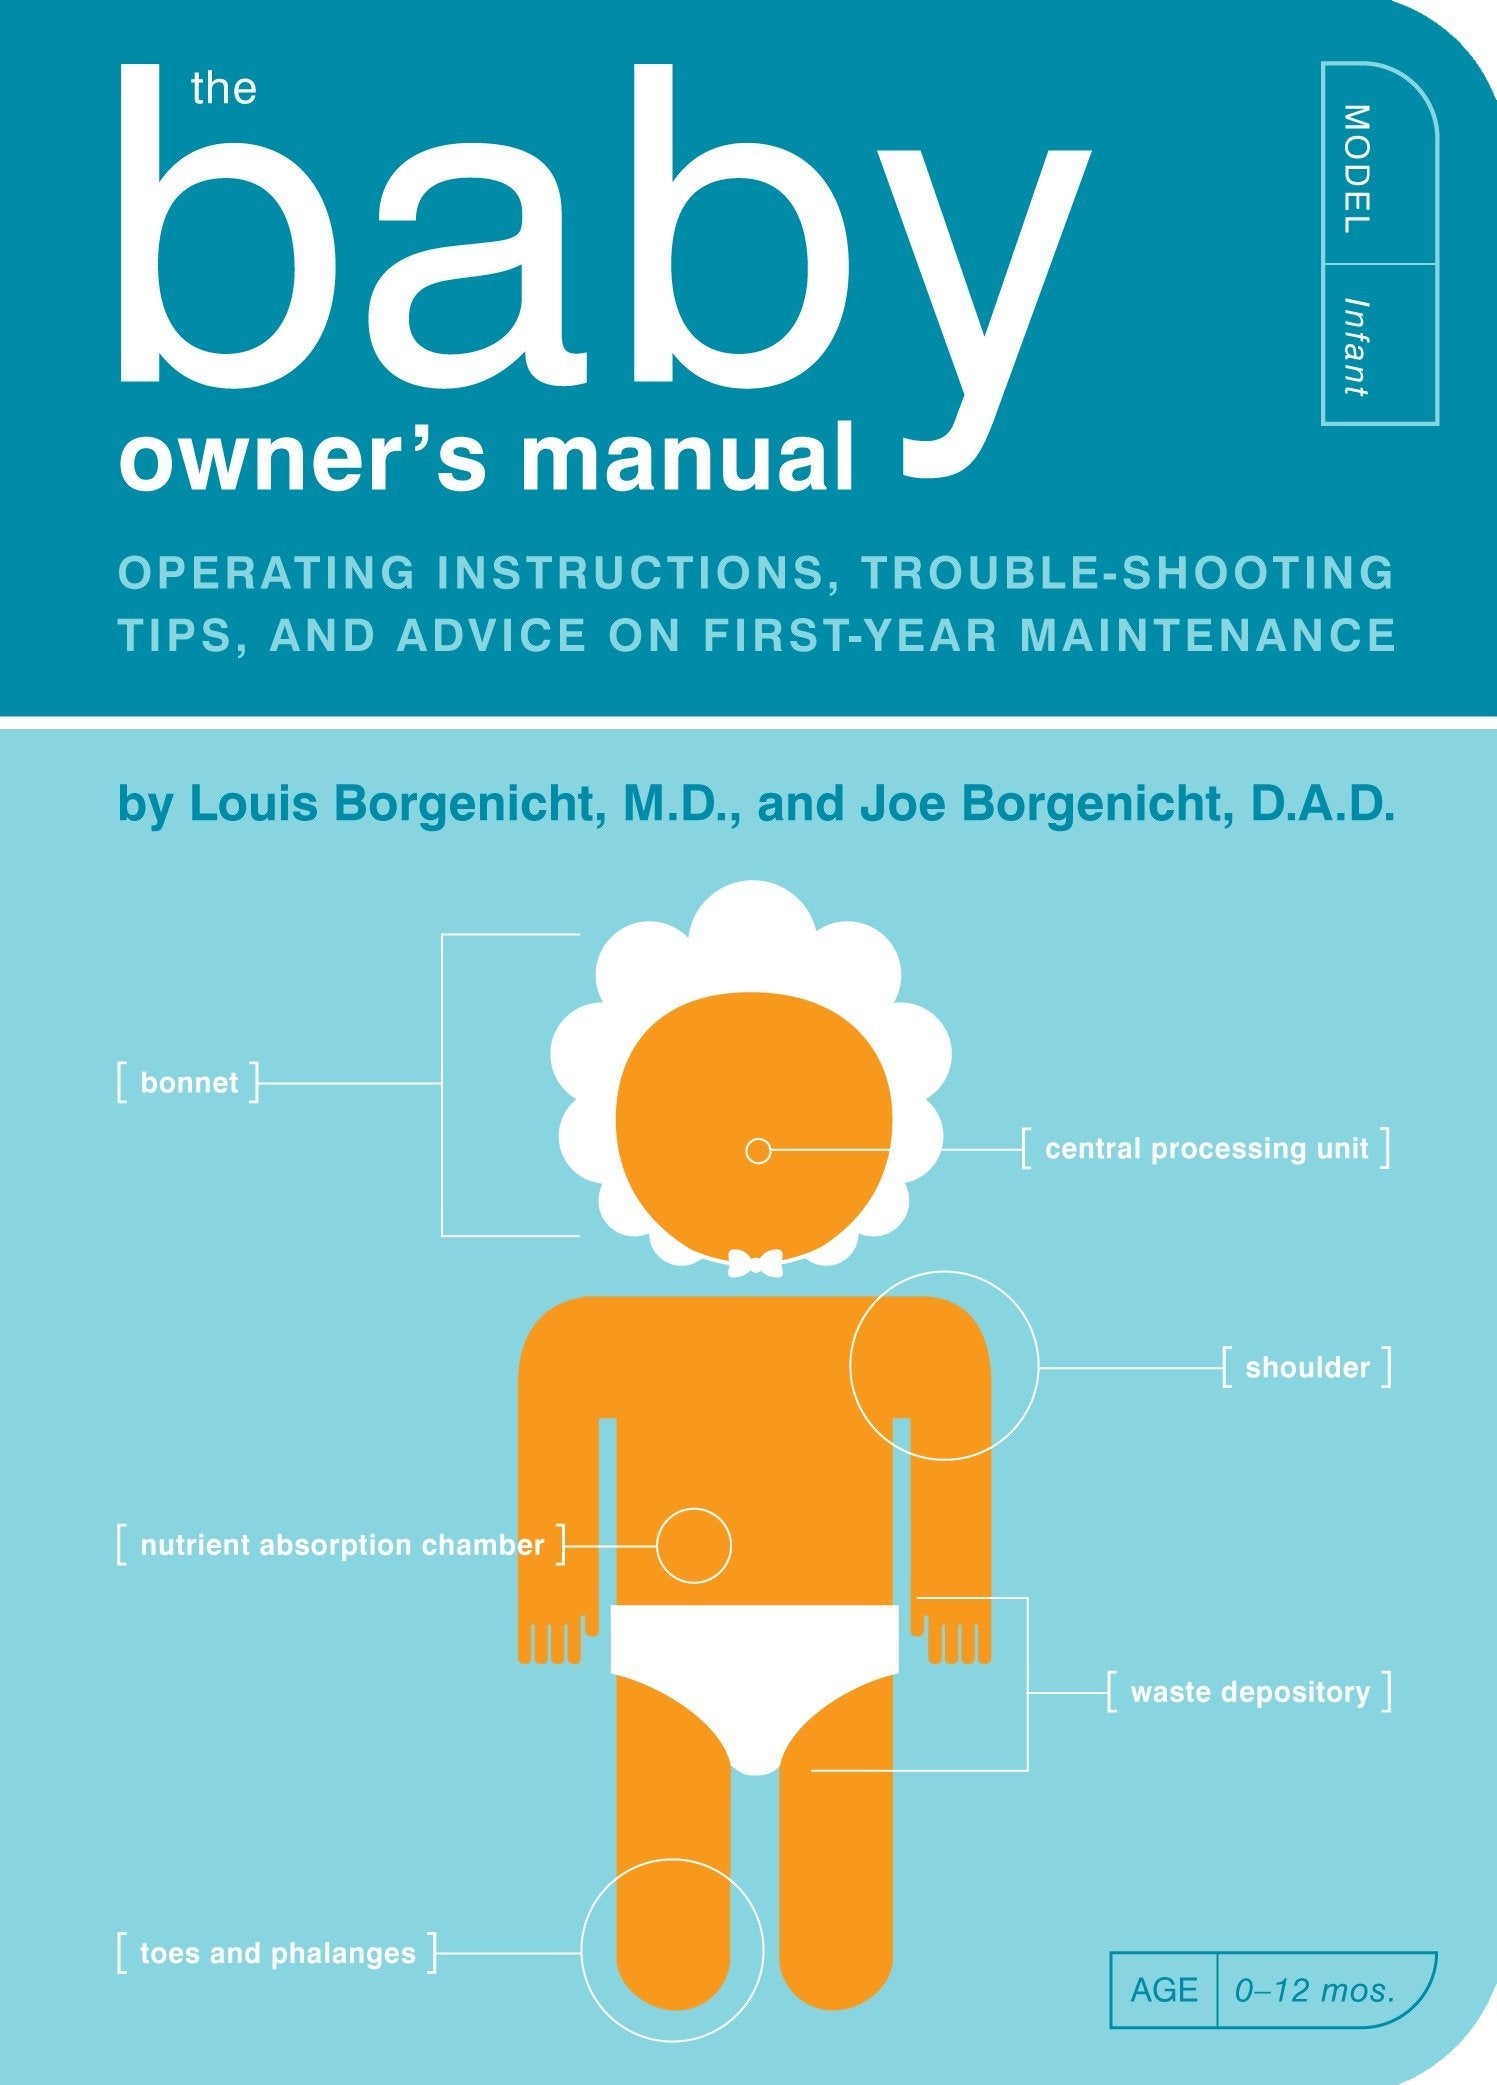 The Baby Owner's Manual: Operating Instructions, Trouble-Shooting Tips, and Advice on First-Year Maintenance - Louis Borgenicht